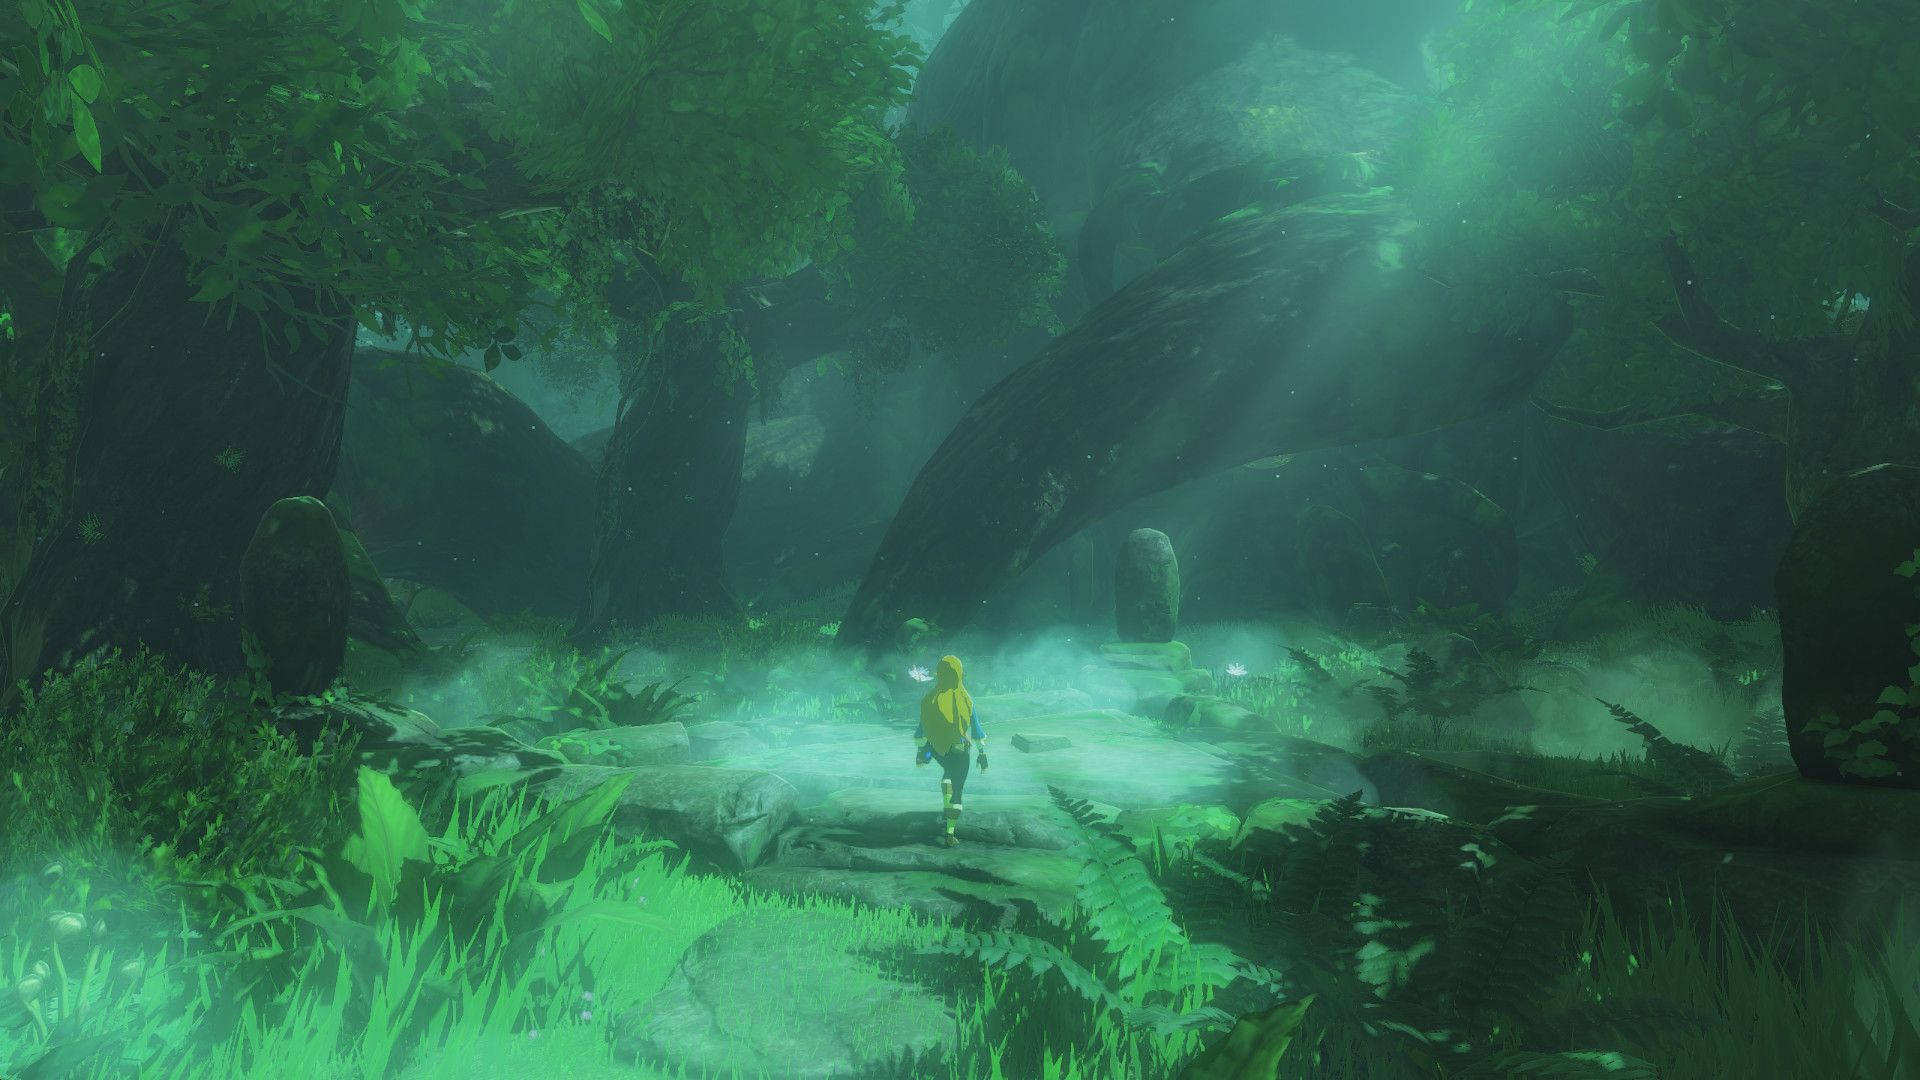 Take a stroll through the vast green wilds of Hyrule. Wallpaper